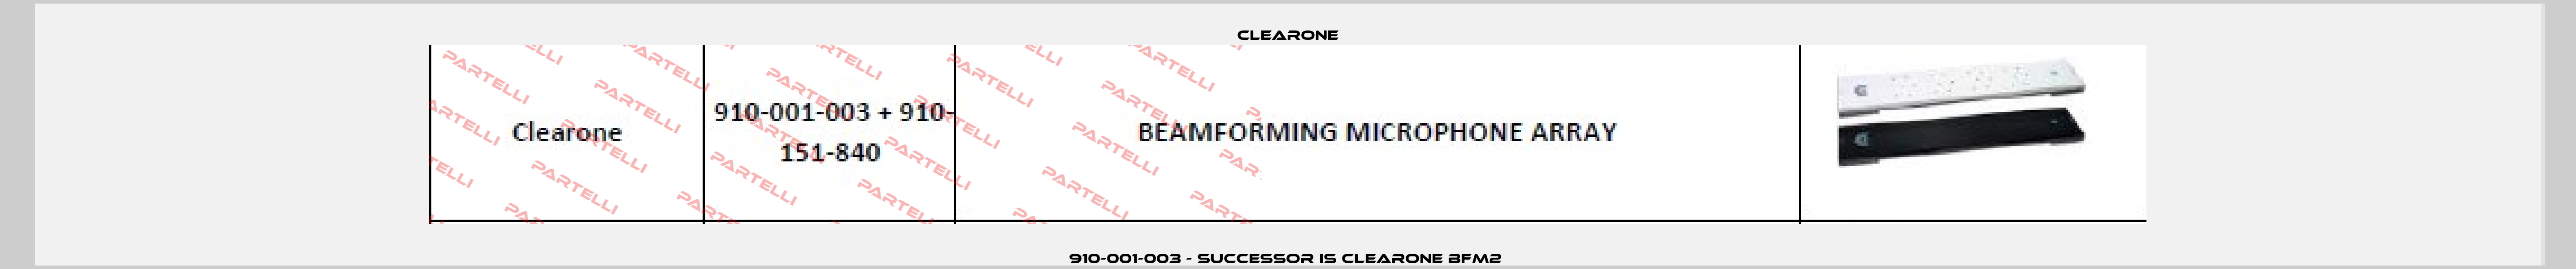 910-001-003 - successor is ClearOne BFM2  Clearone